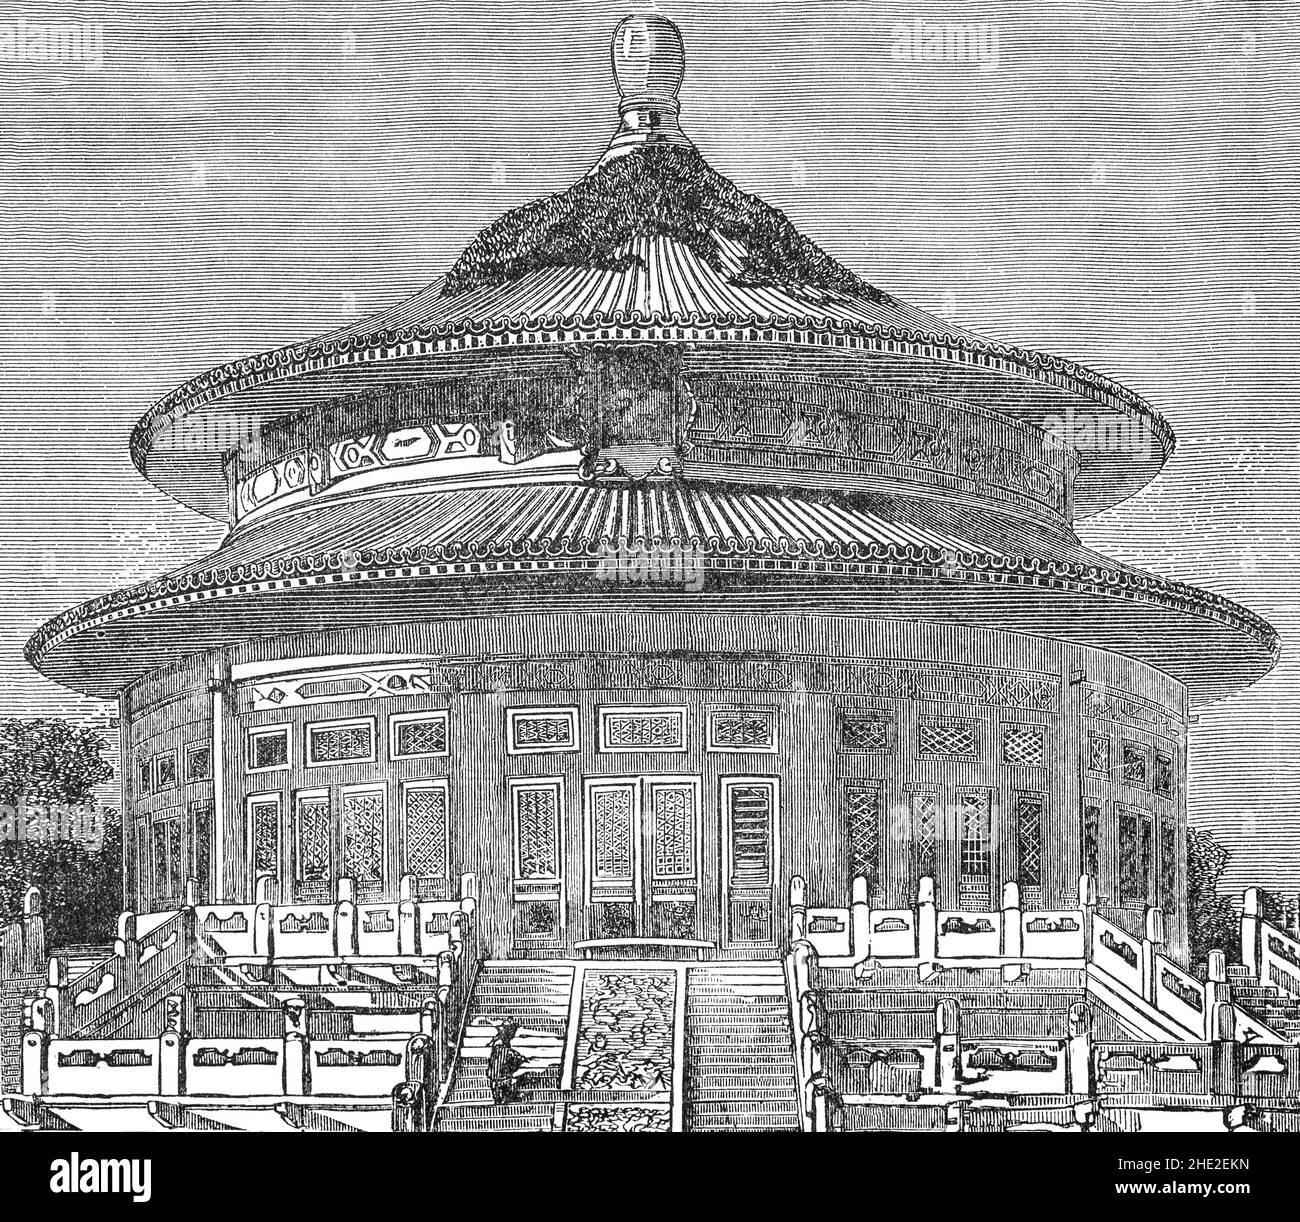 A late 19th Century illustration of The Temple of Heaven, an imperial complex of religious buildings situated in the southeastern part of central Beijing aka Peking. The complex was visited by the Emperors of the Ming and Qing dynasties for annual ceremonies of prayer to Heaven for a good harvest. Chinese temples were used as place of worship where people revere ethnic Chinese gods and ancestors. Stock Photo